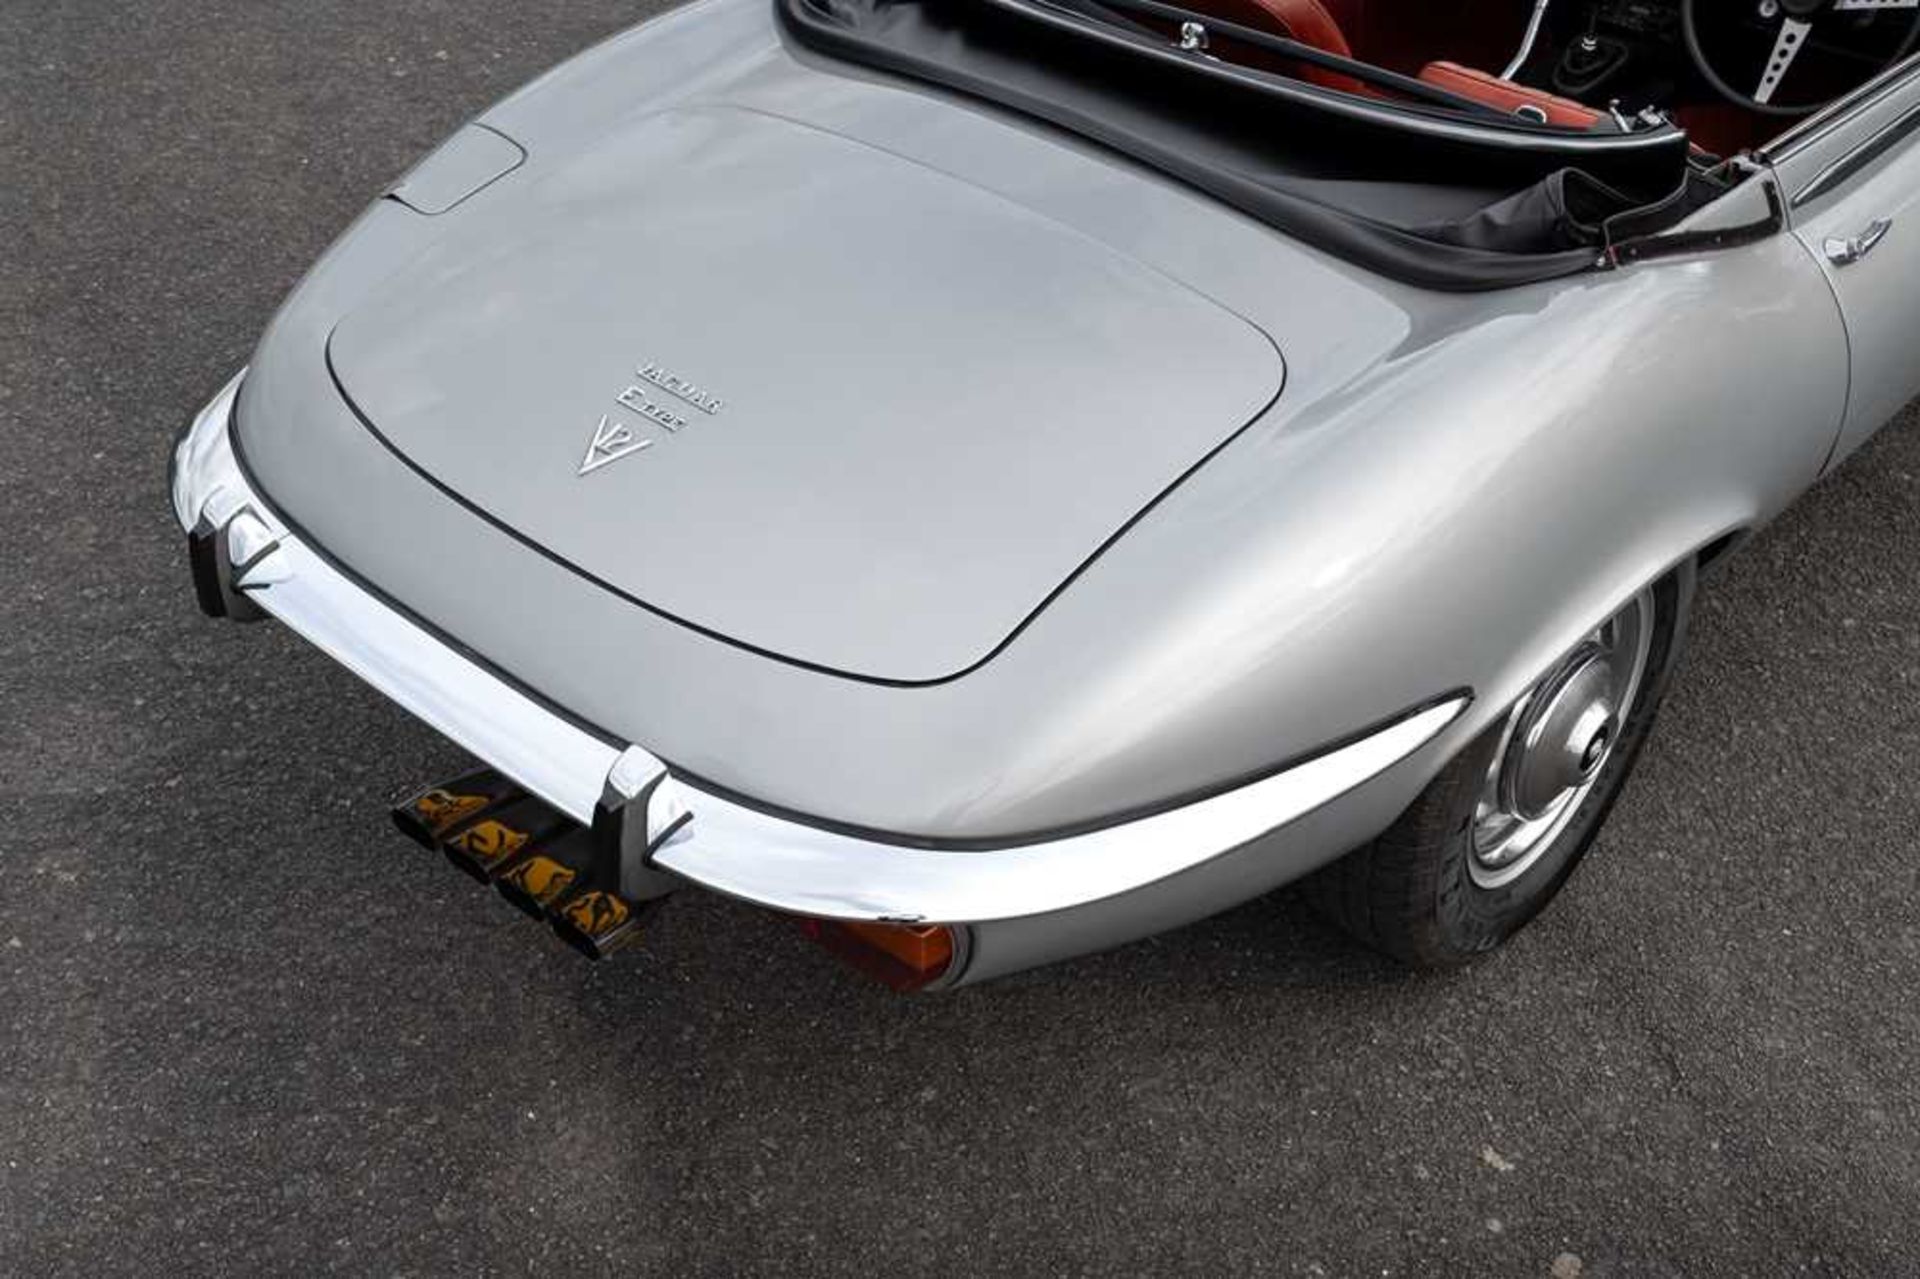 1974 Jaguar E-Type Series III V12 Roadster Only one family owner and 54,412 miles from new - Image 71 of 89